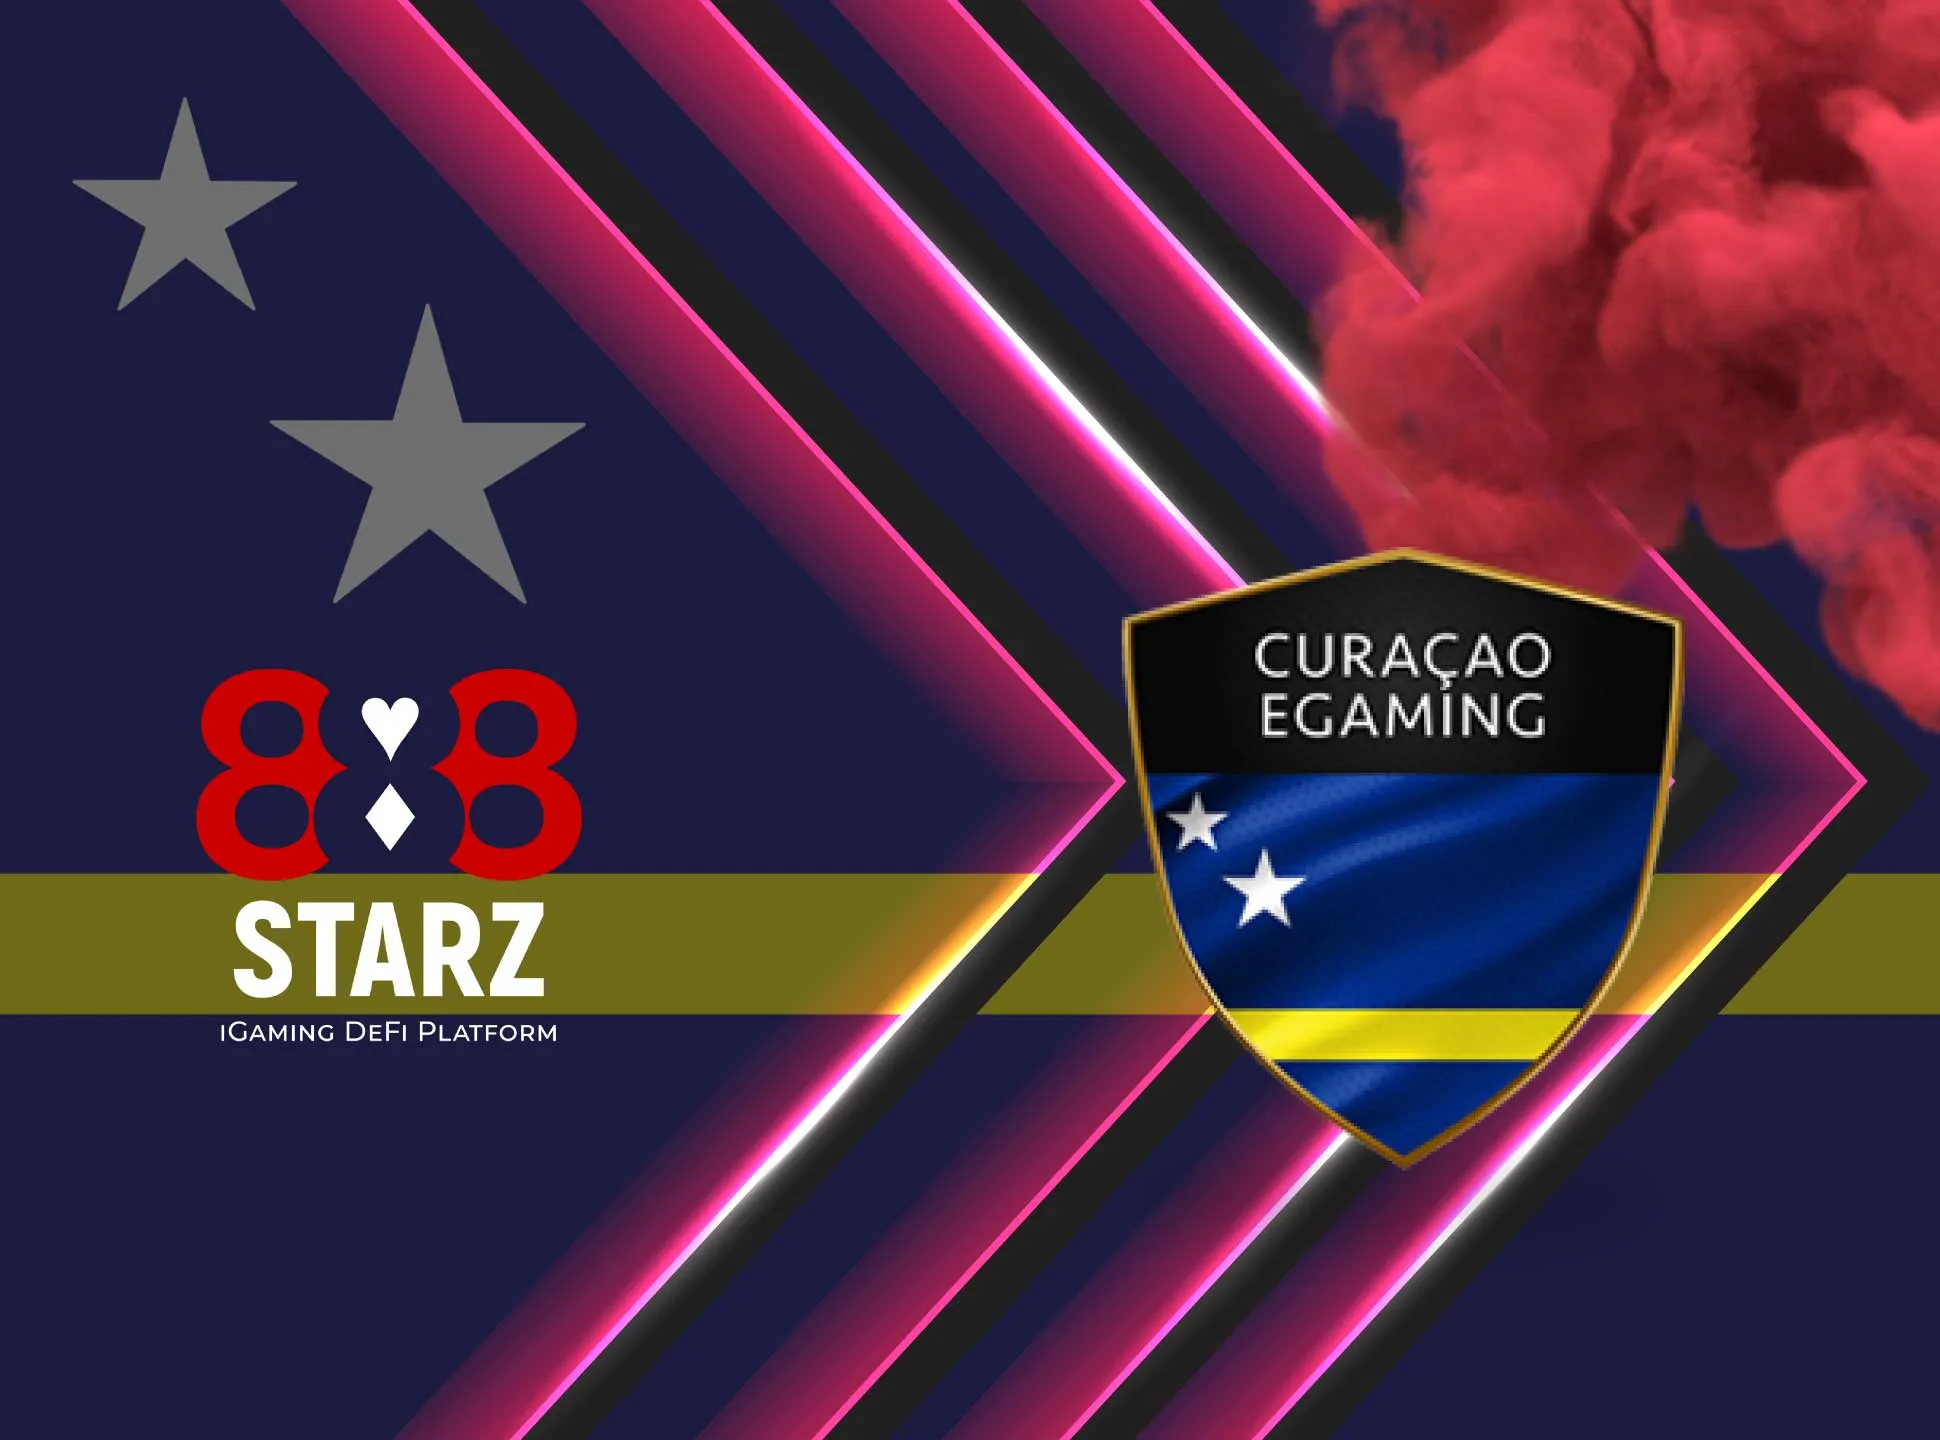 888starz is licensed by Curacao Commission.